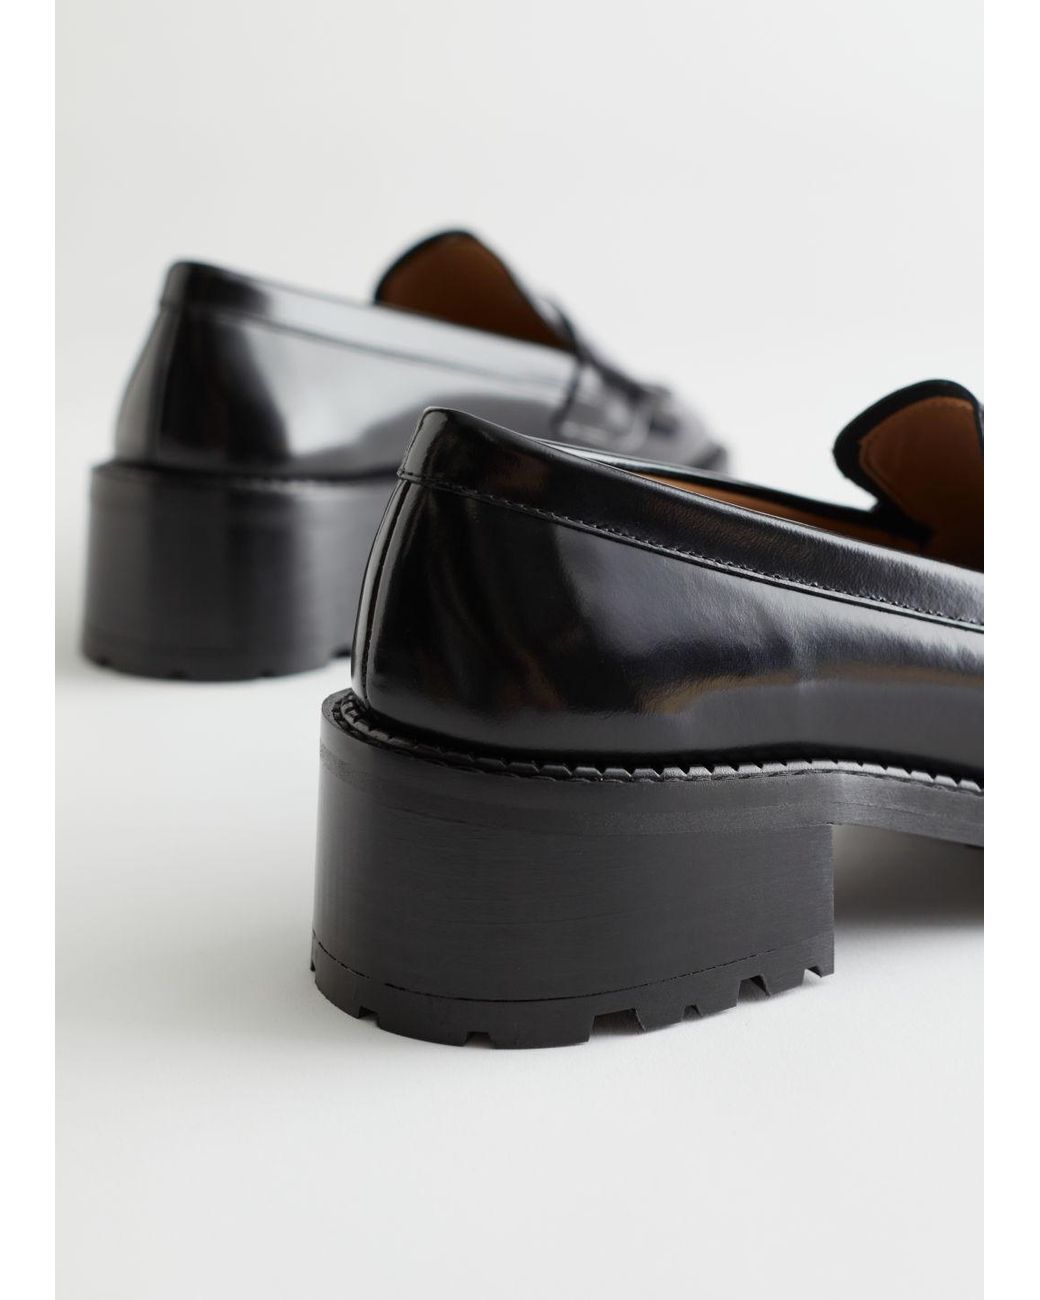 & Other Stories Heeled Leather Penny Loafers in Black | Lyst UK